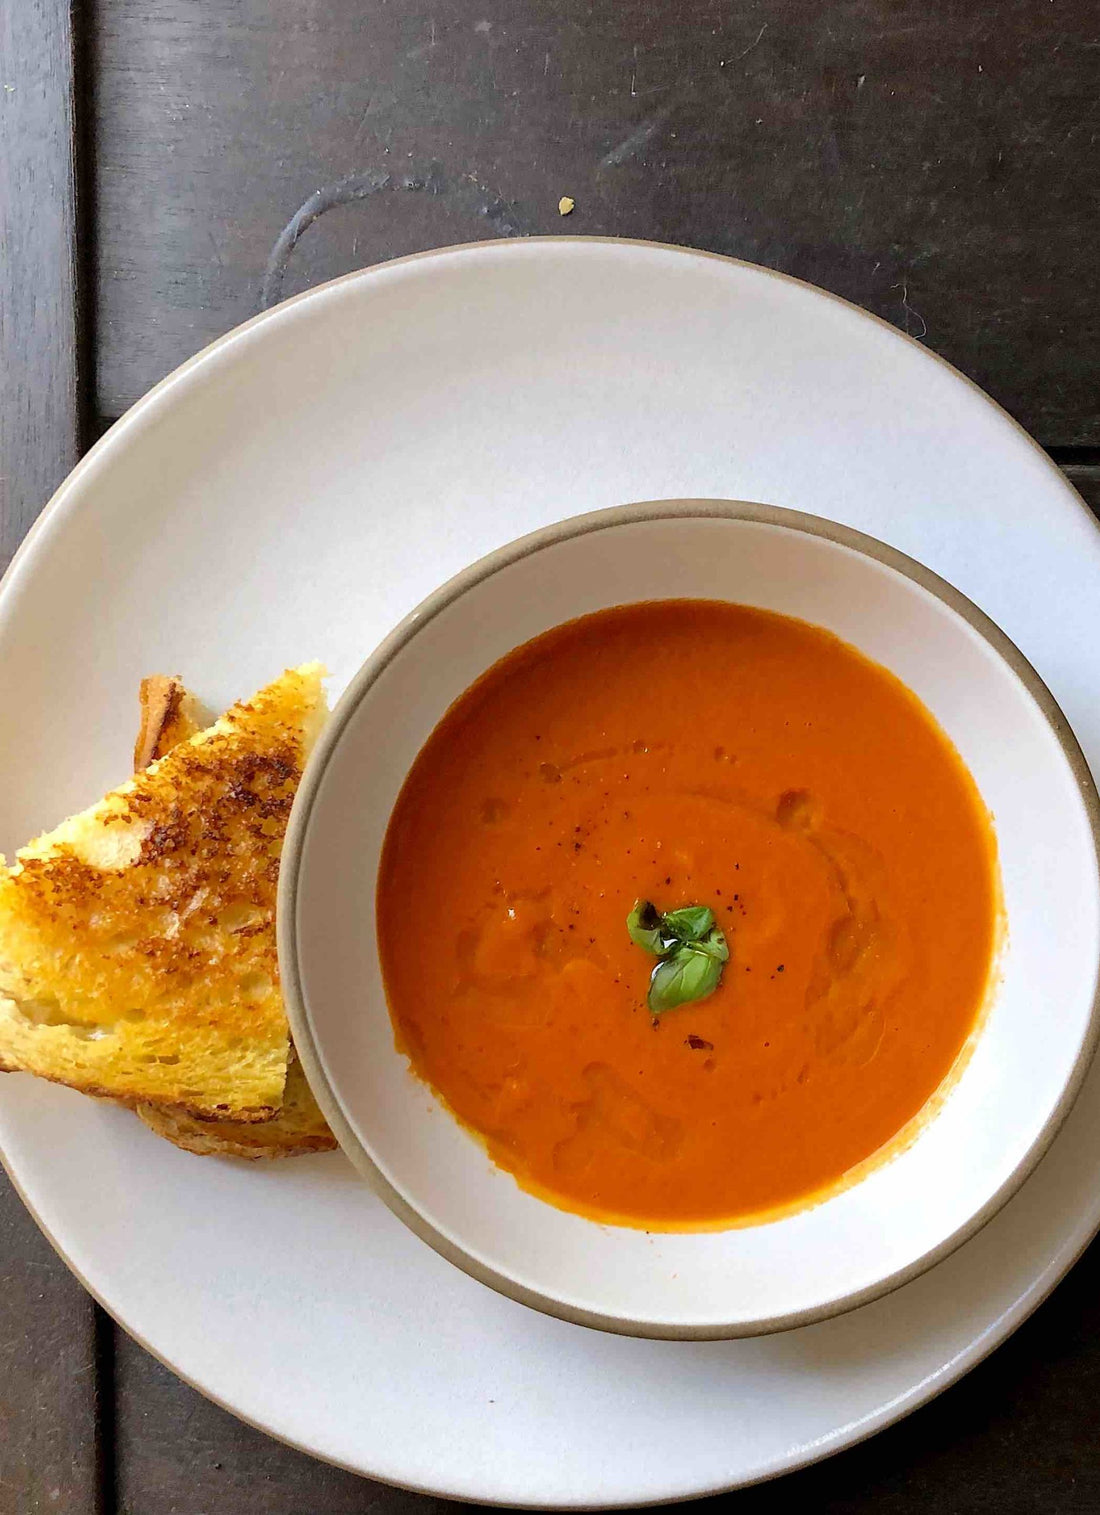 Tomato Basil Soup with Grilled Cheese